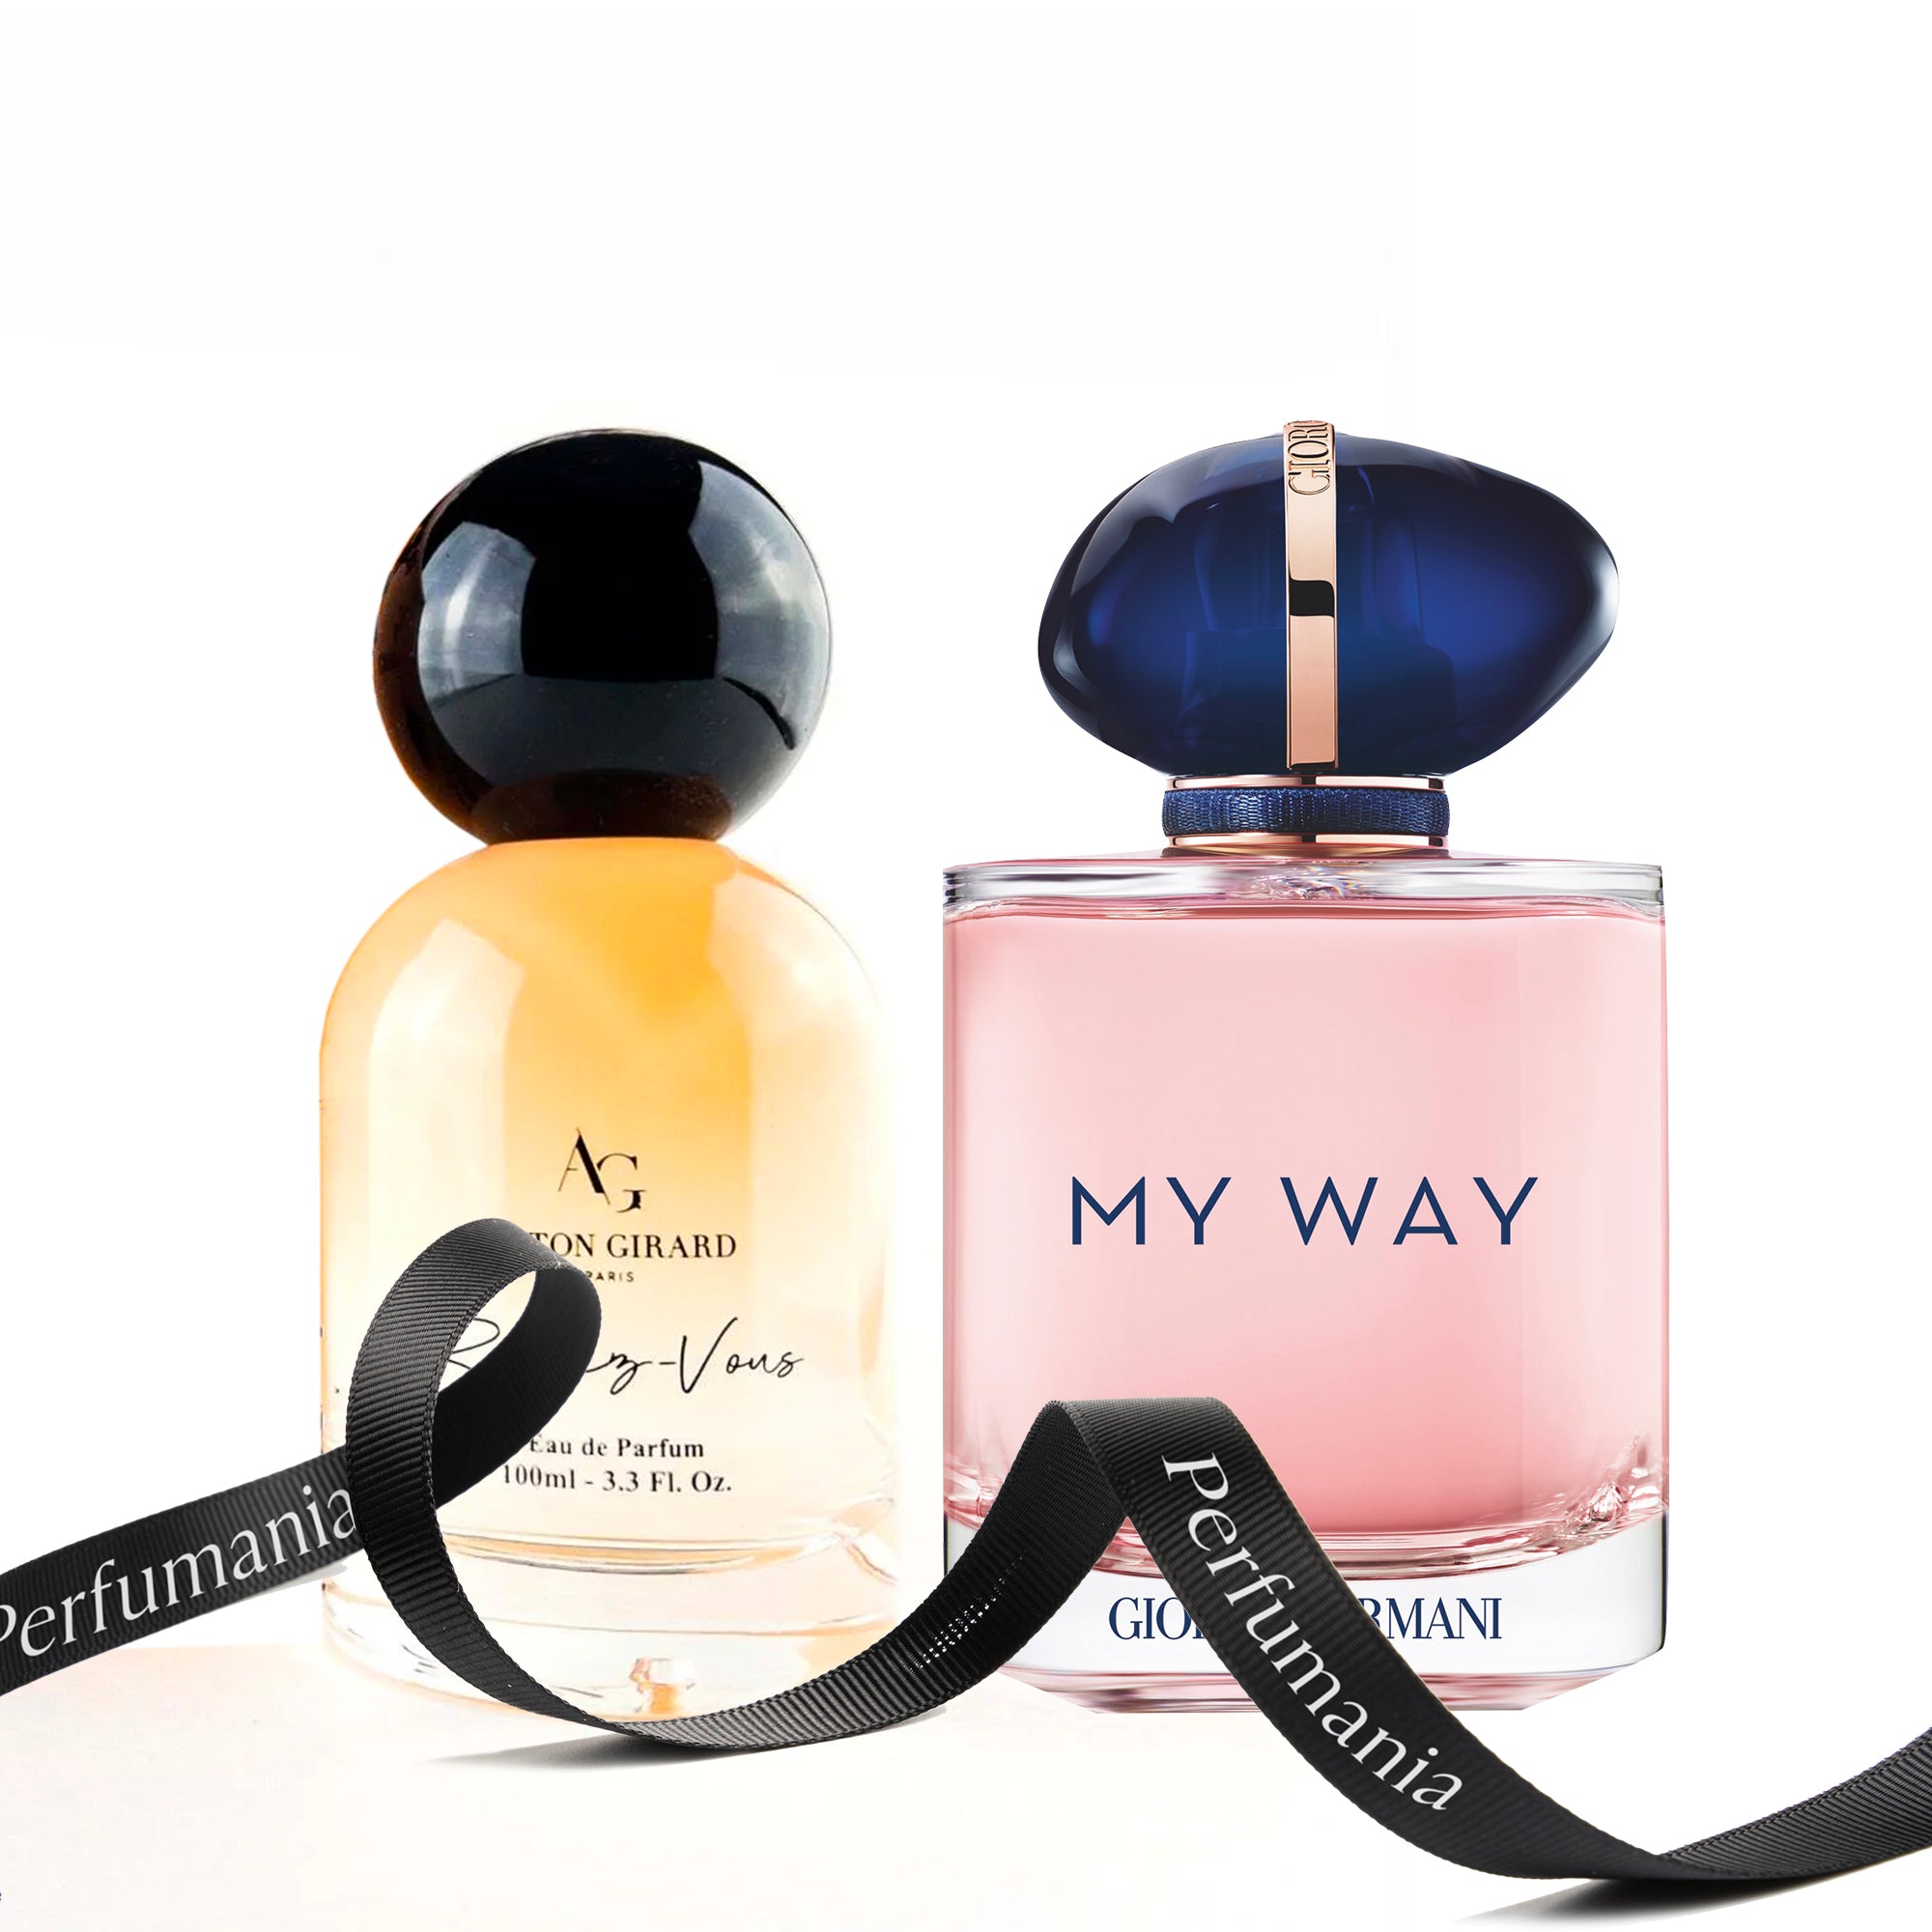 Bundle for Women: Rendez-vous by Axton Girard and My Way by Giorgio Armani Featured image